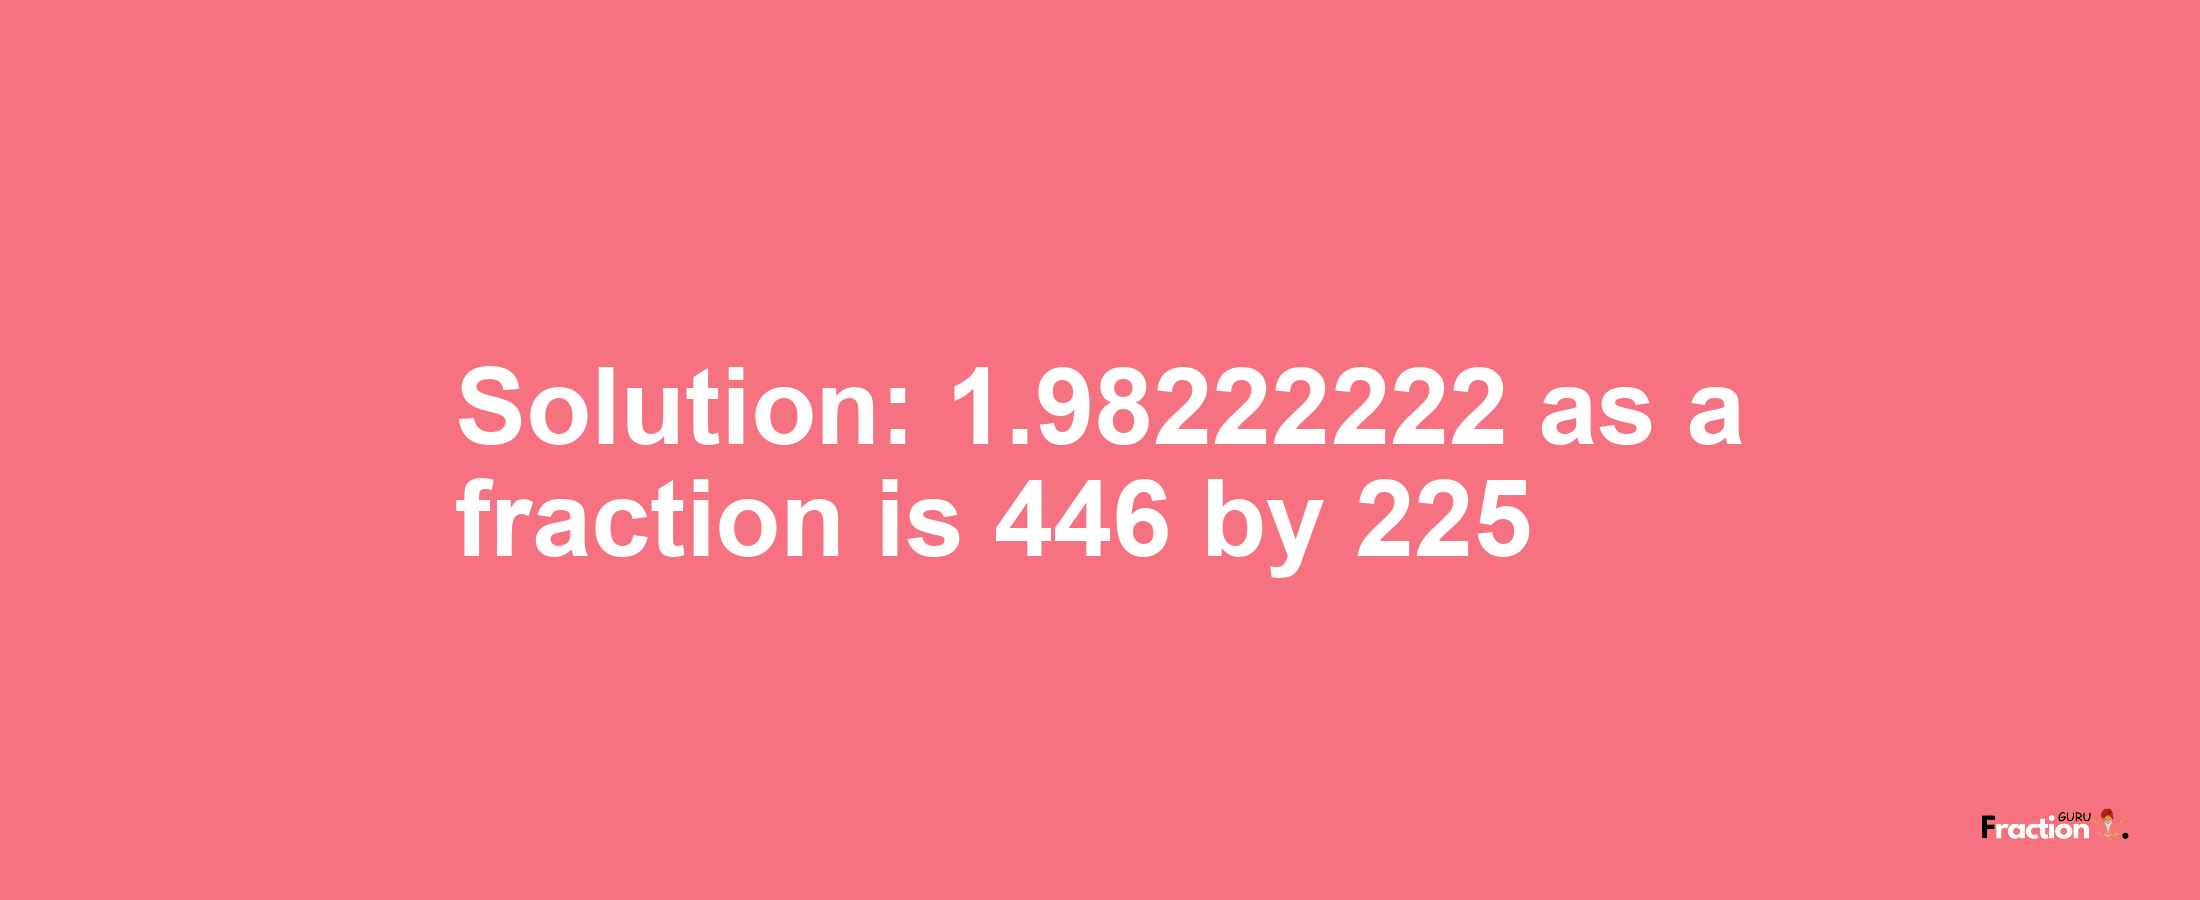 Solution:1.98222222 as a fraction is 446/225